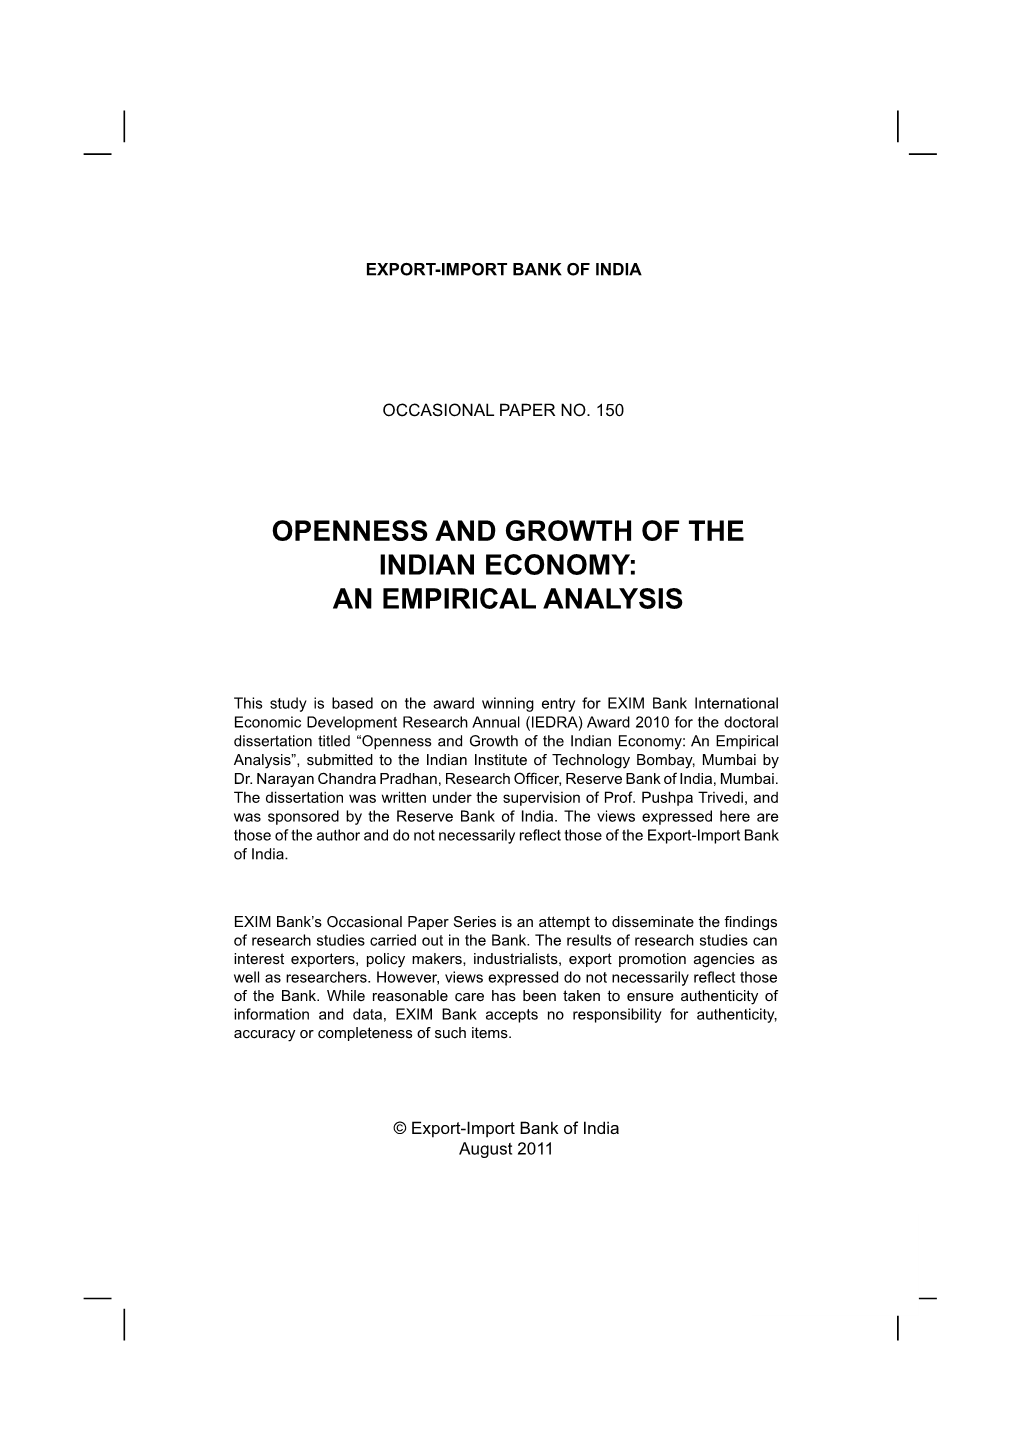 Openness and Growth of the Indian Economy: an Empirical Analysis